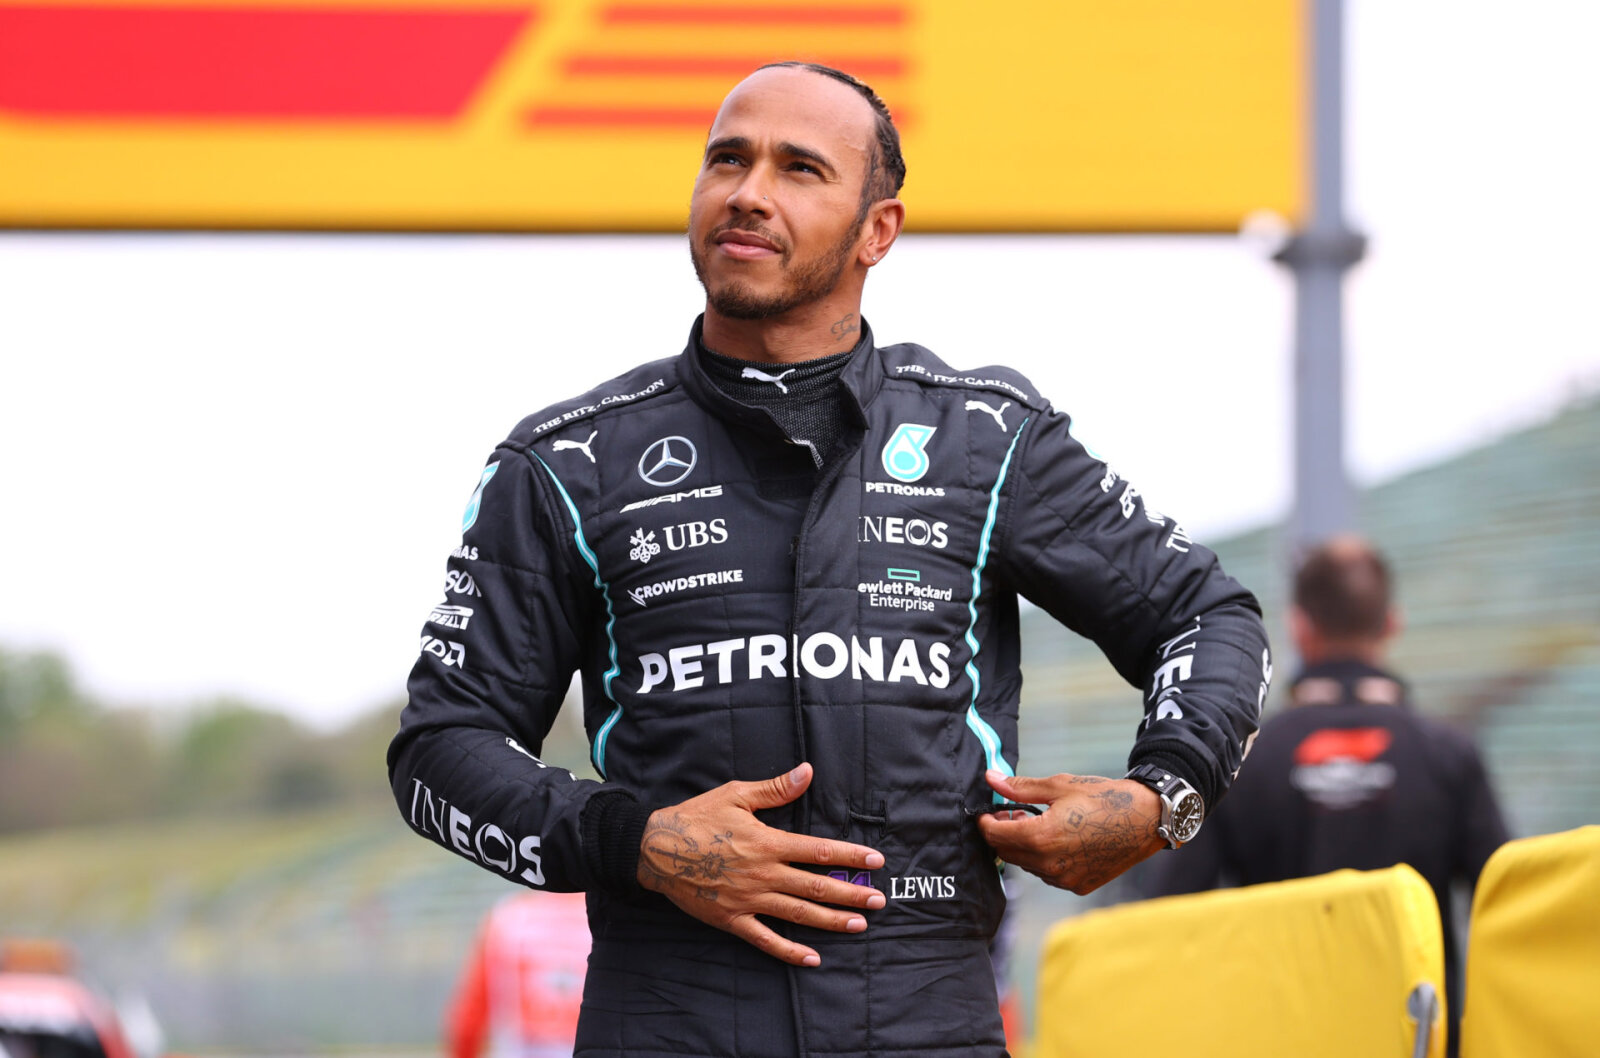 Hamilton sees British GP sprint qualifying as 'a train', fans will not be much excited